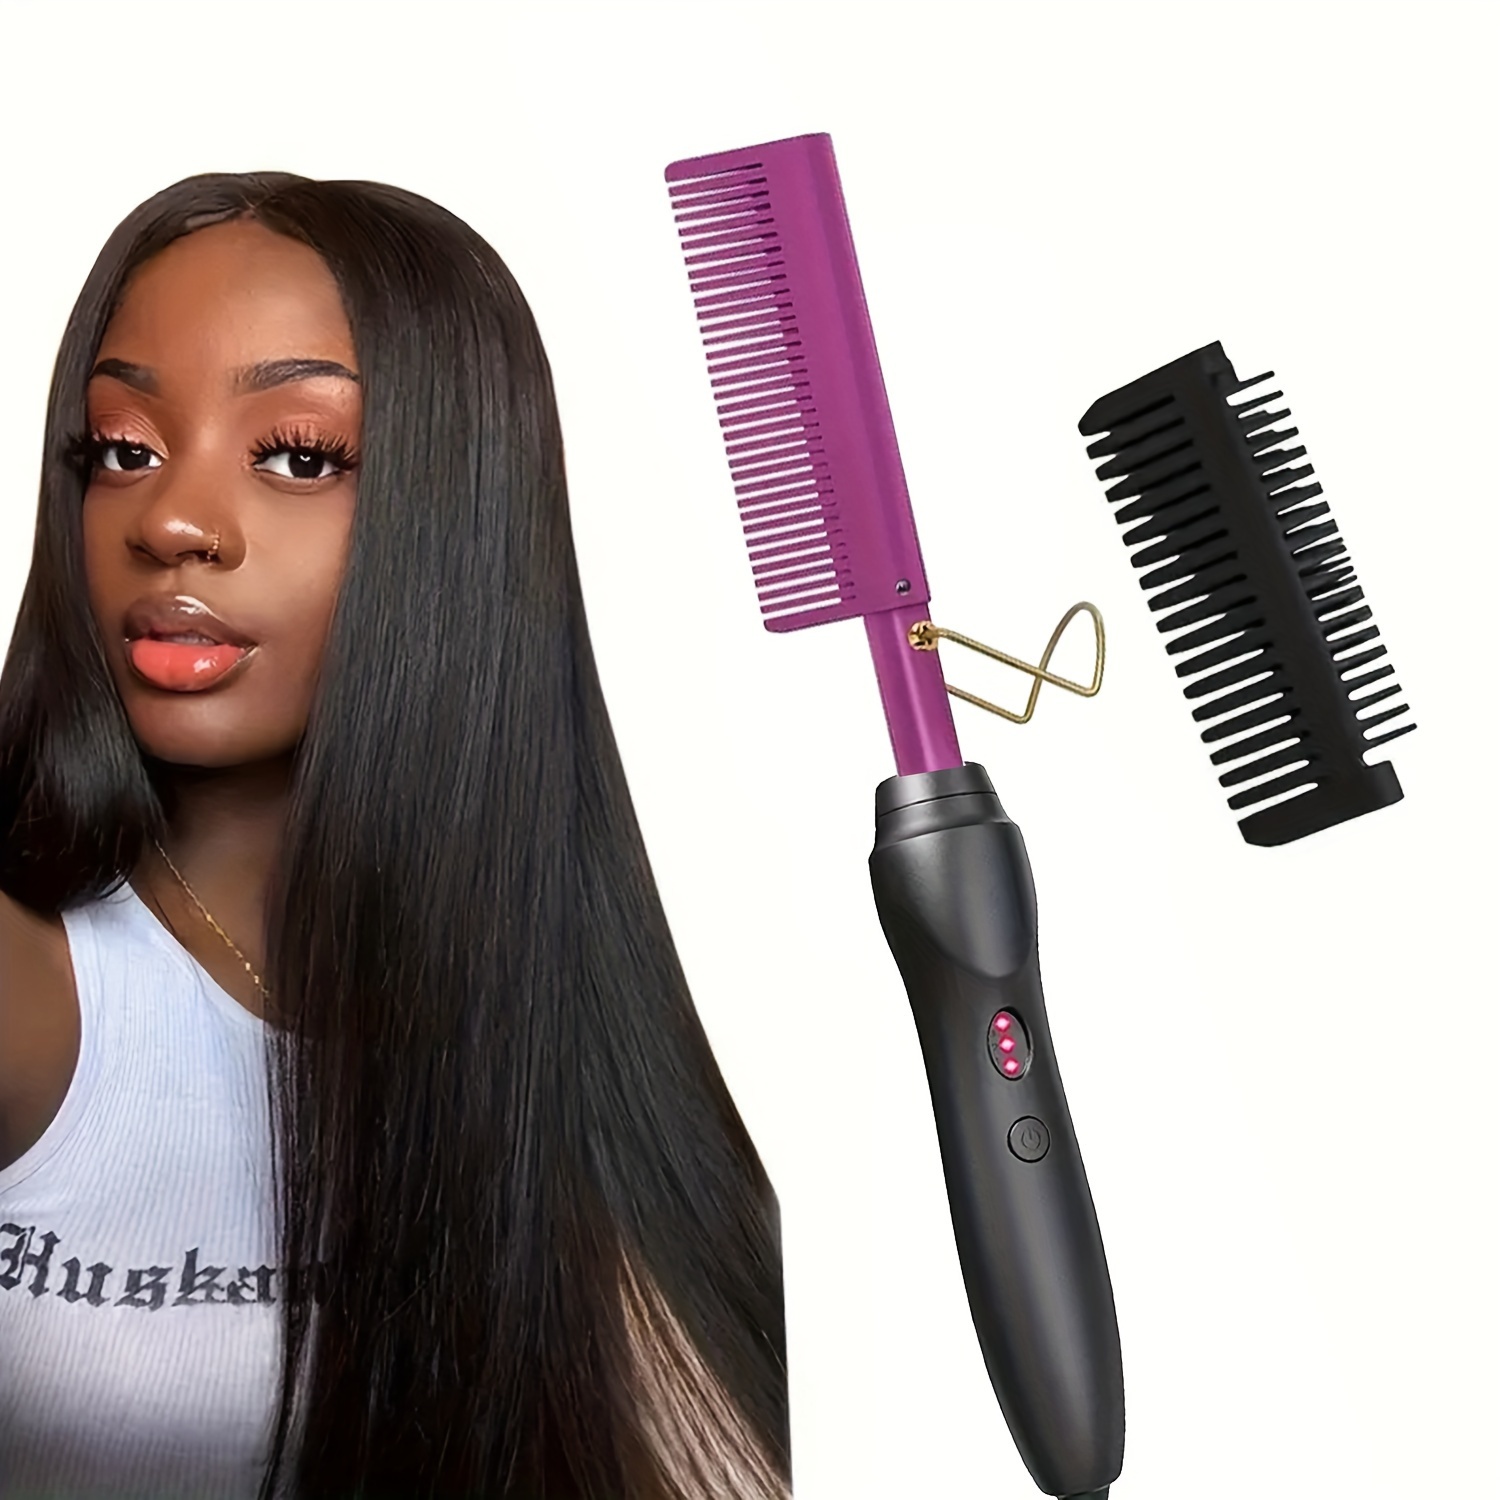 

Electric Hair Straightener Comb, Electric Heated Comb Hair Straightener Higher Temperature, Hair Clips For Stylist And Salon Home Use, Can Be Used For Dry Or Wet Hair